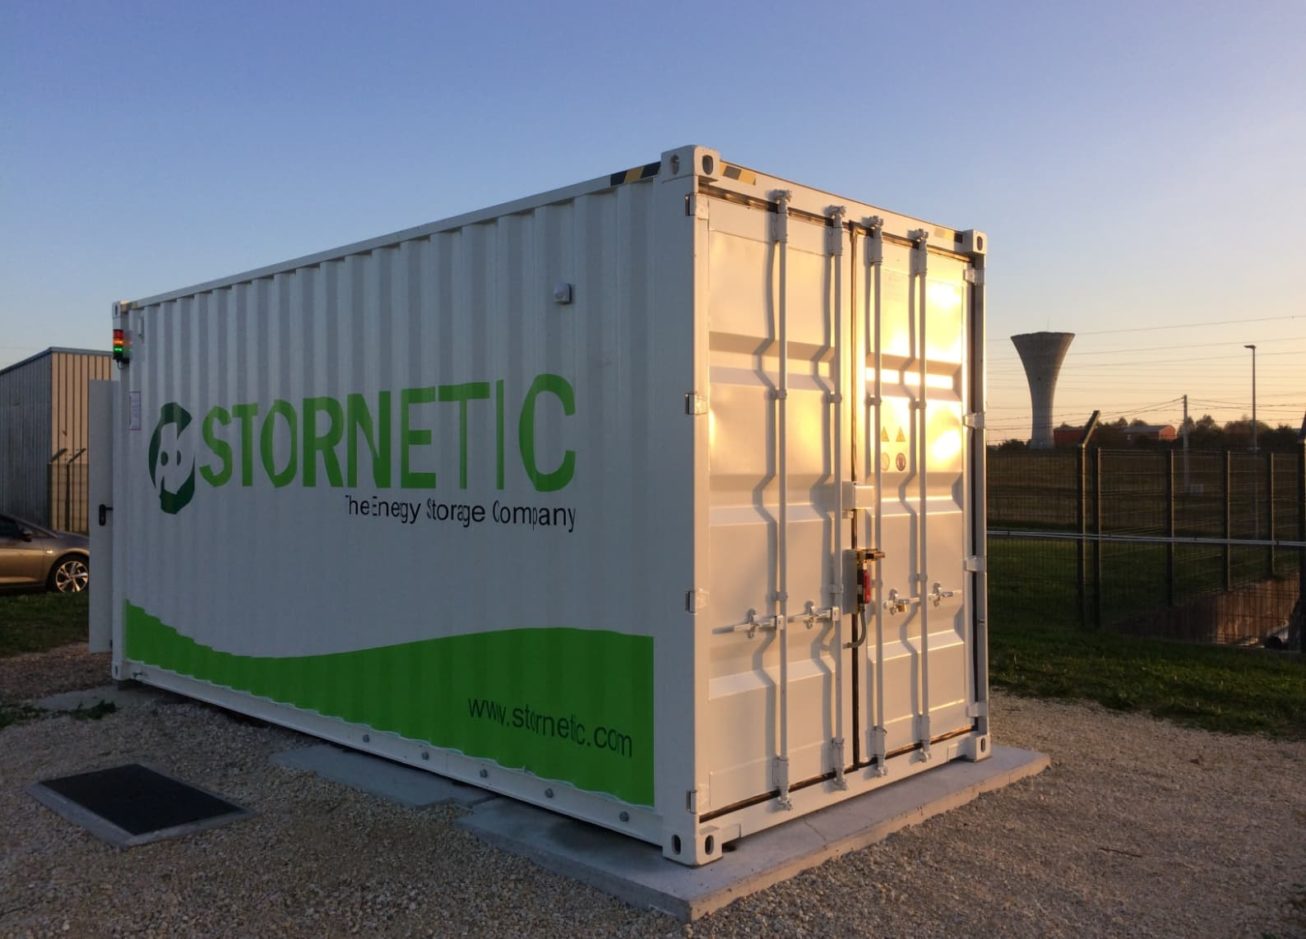 A fitted Stornetic DuraStor container at sunset